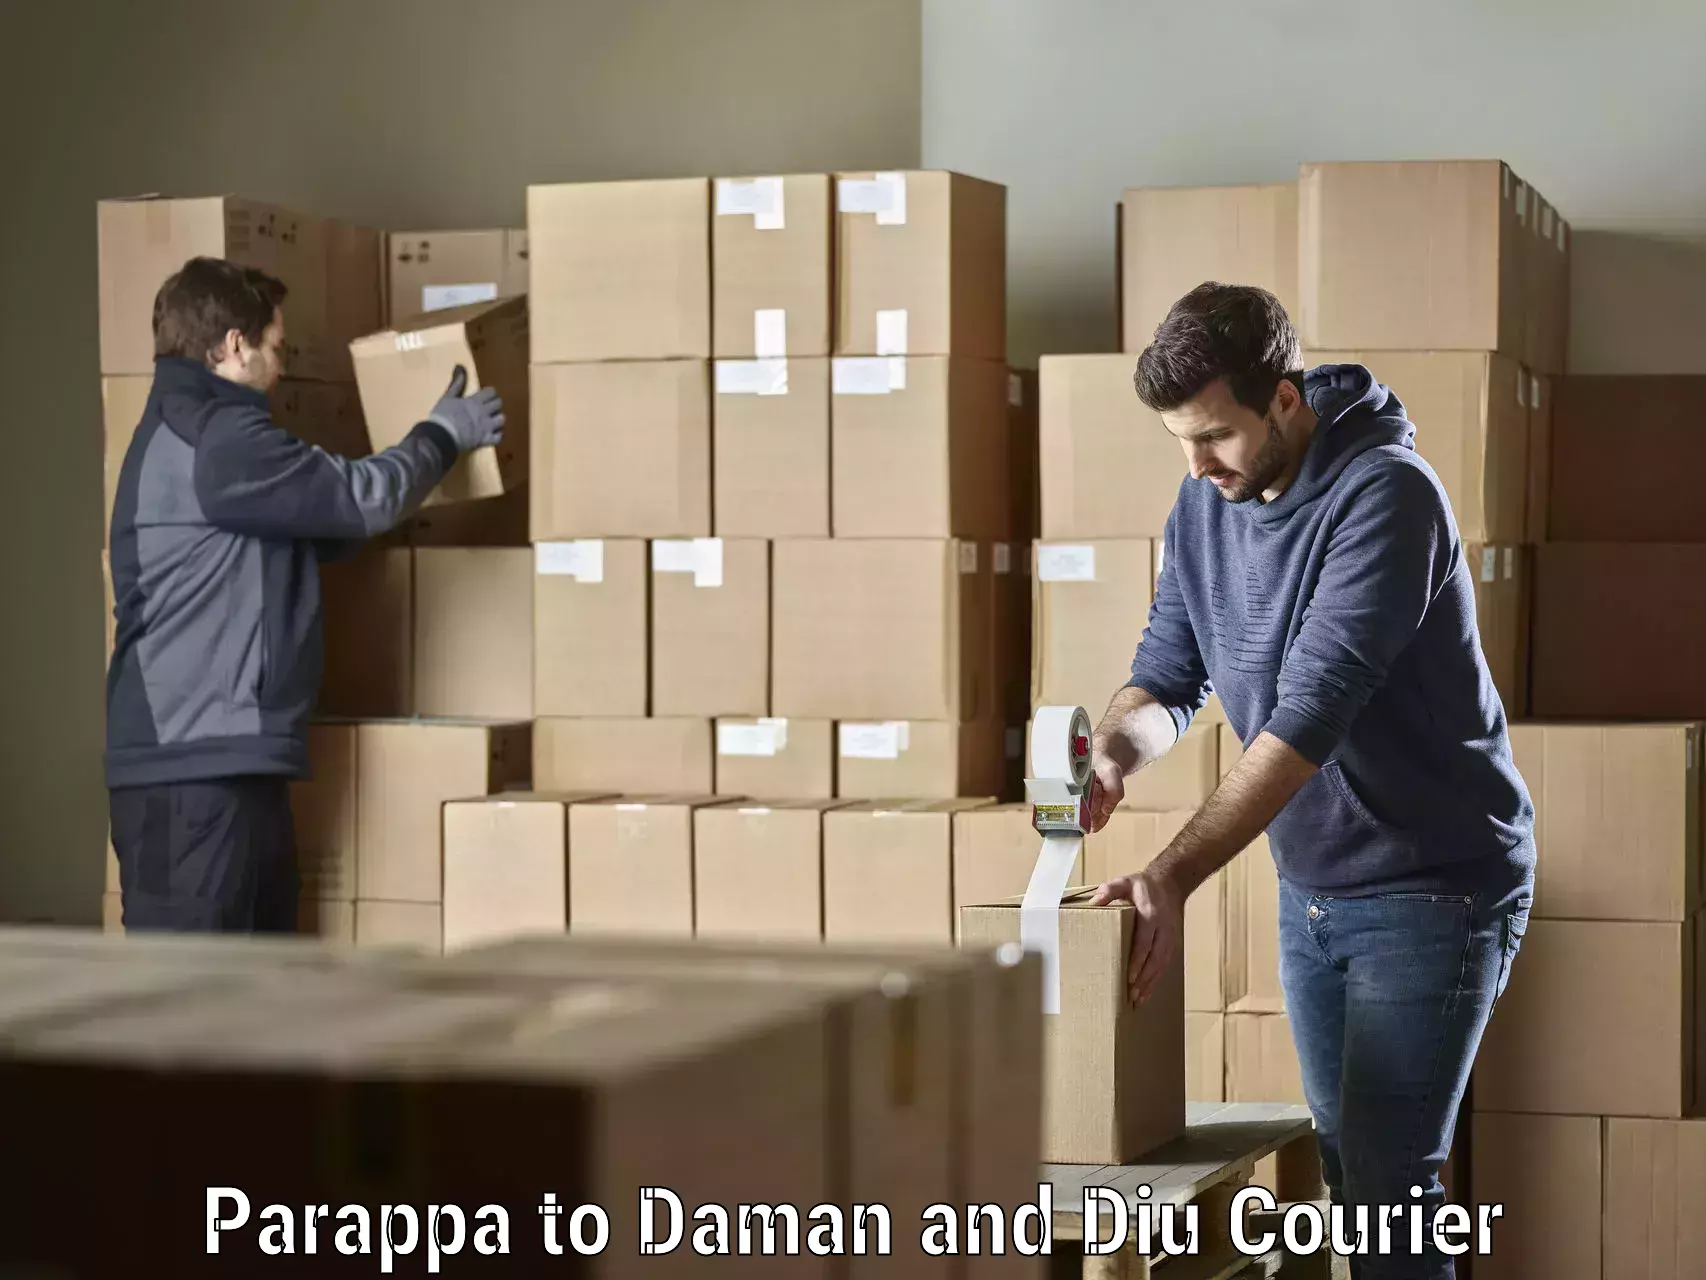 Full-service courier options Parappa to Daman and Diu